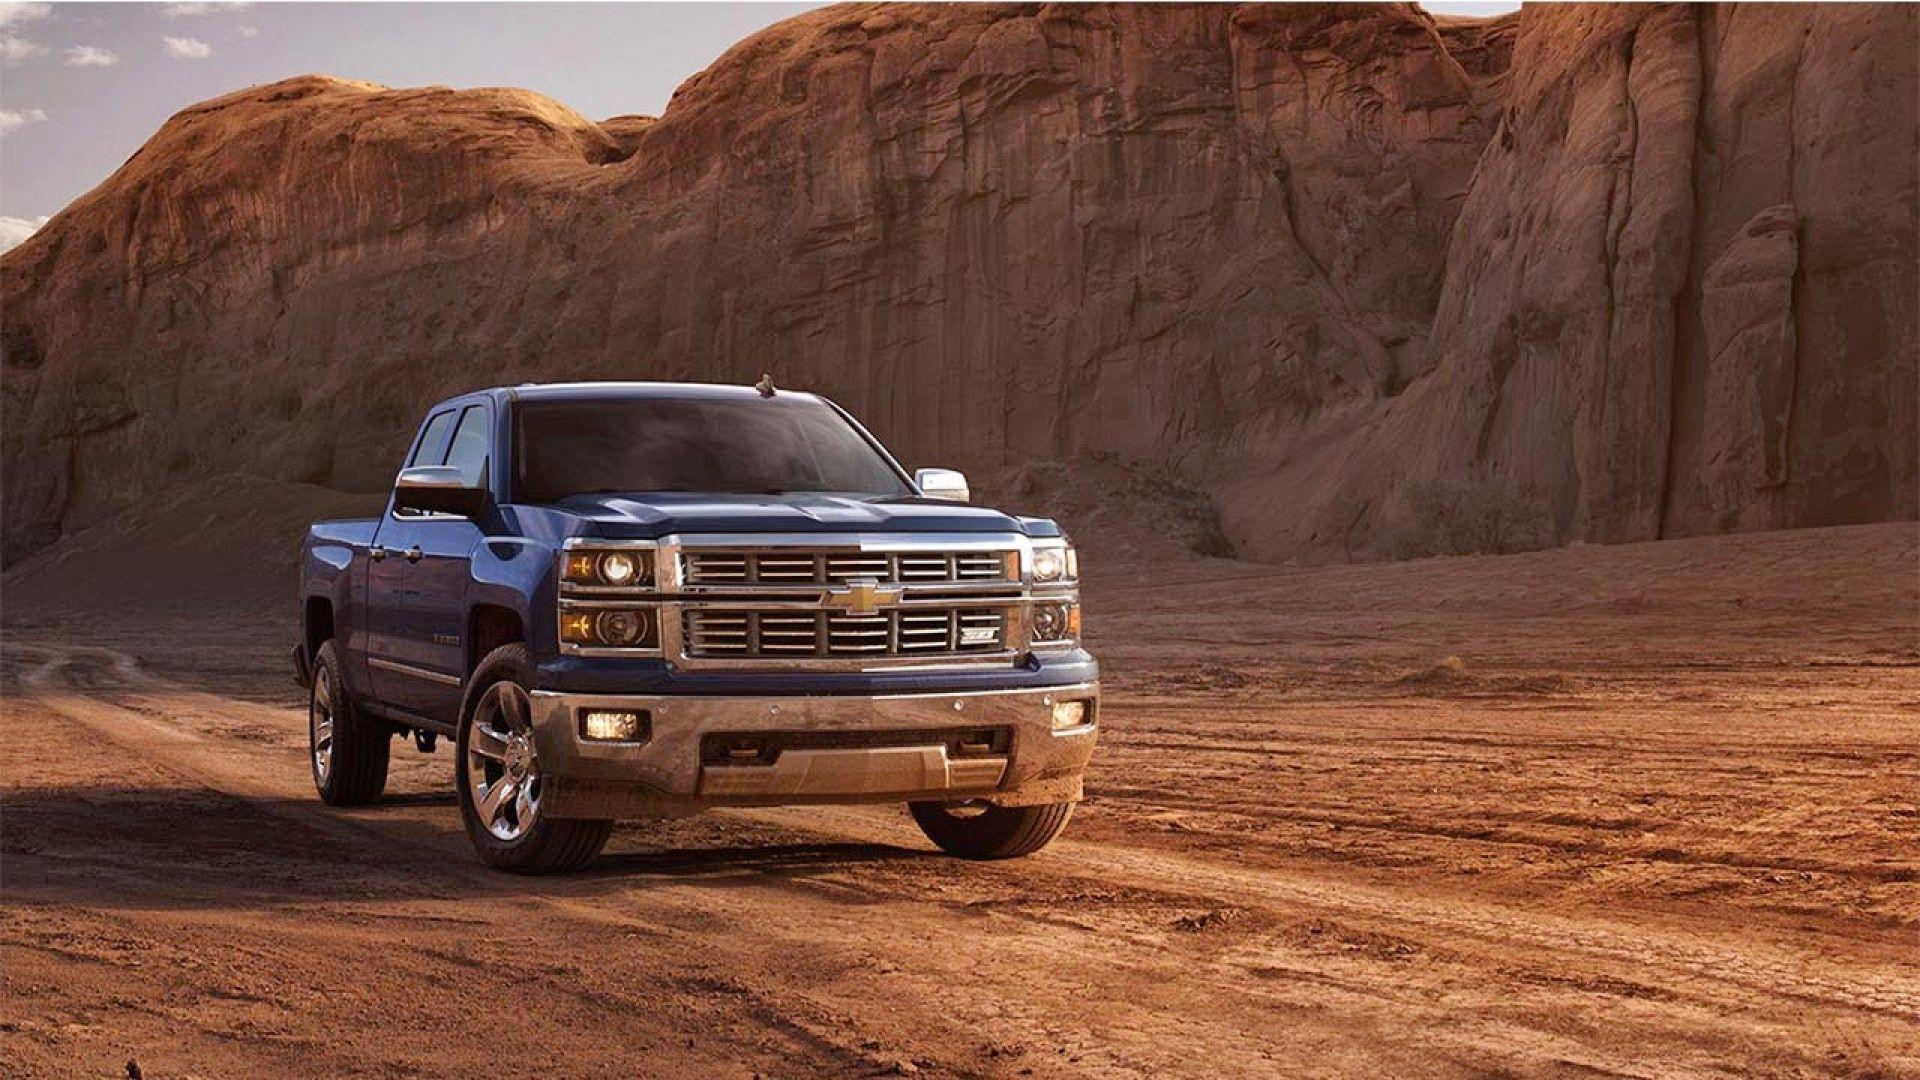 Download Chevy Truck Wallpapers Gallery.